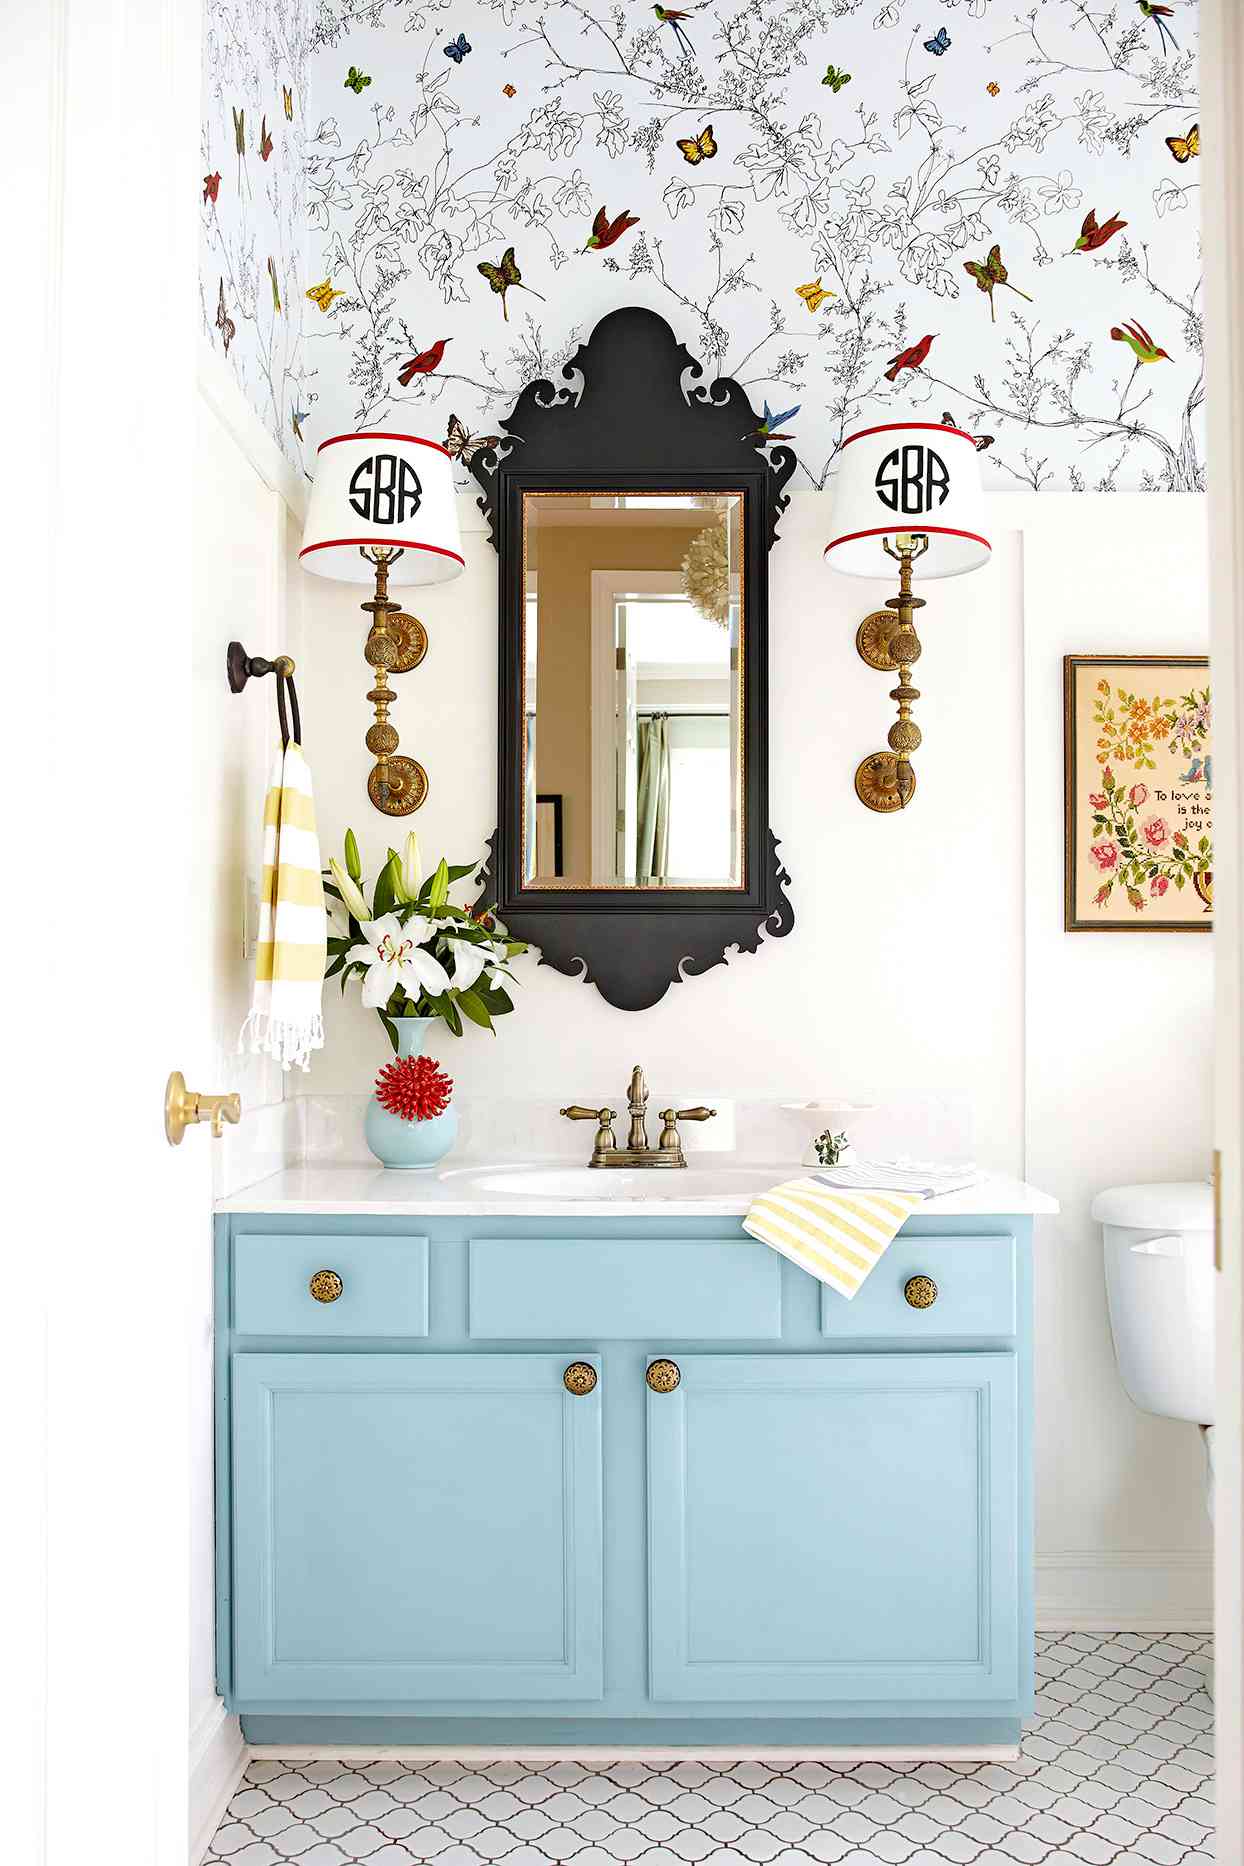 13 Before And After Vanity Makeovers, Bathroom Vanity Cabinets Without Countertop